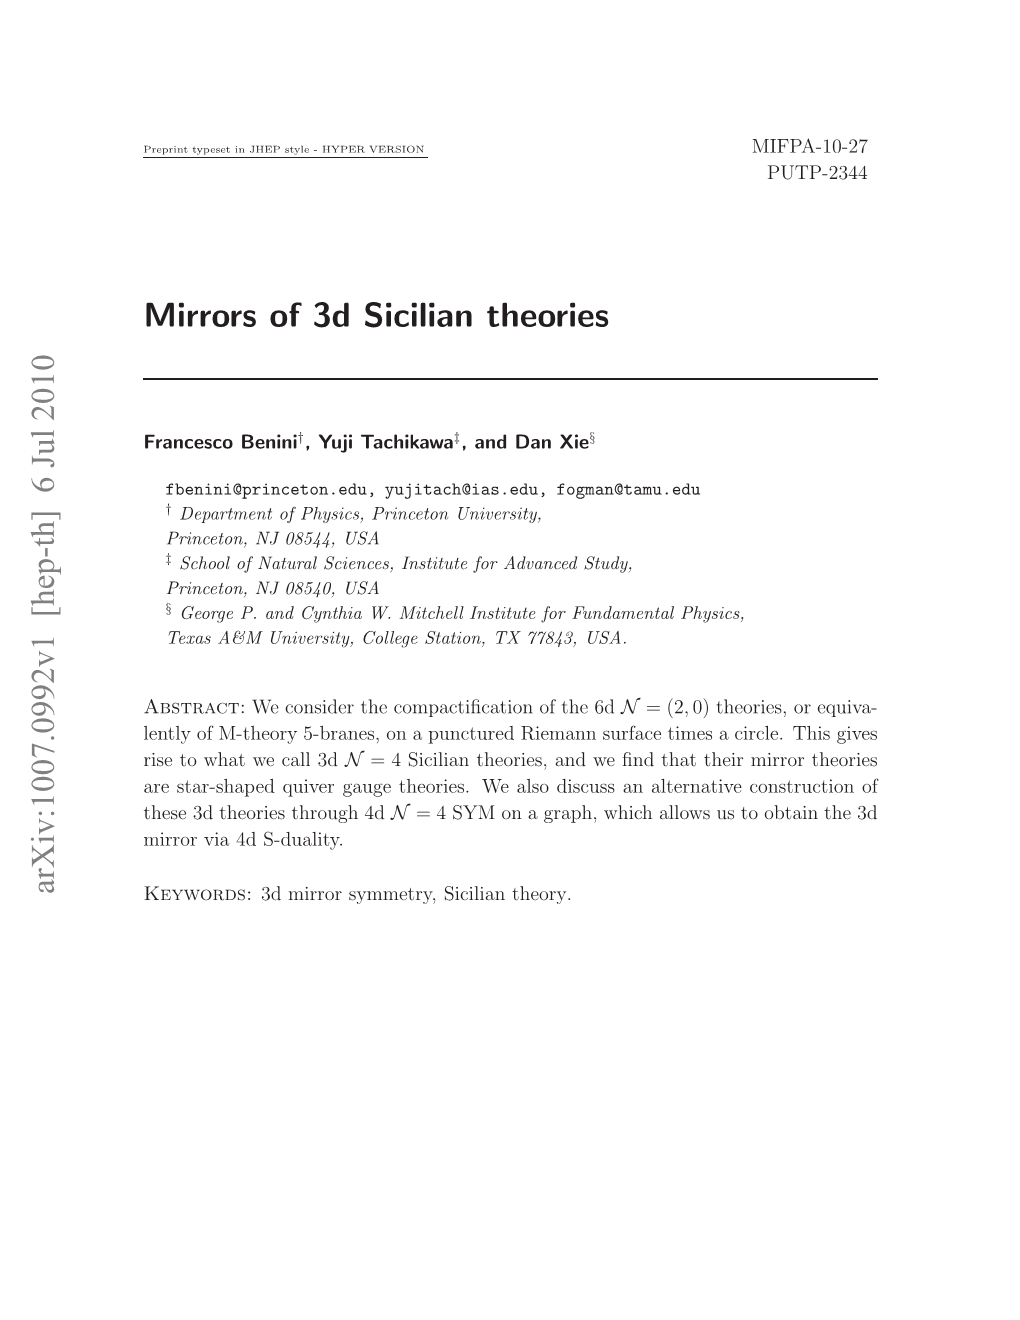 Mirrors of 3D Sicilian Theories of Type DN Obtained from an Arbitrary Punctured Riemann Surface C